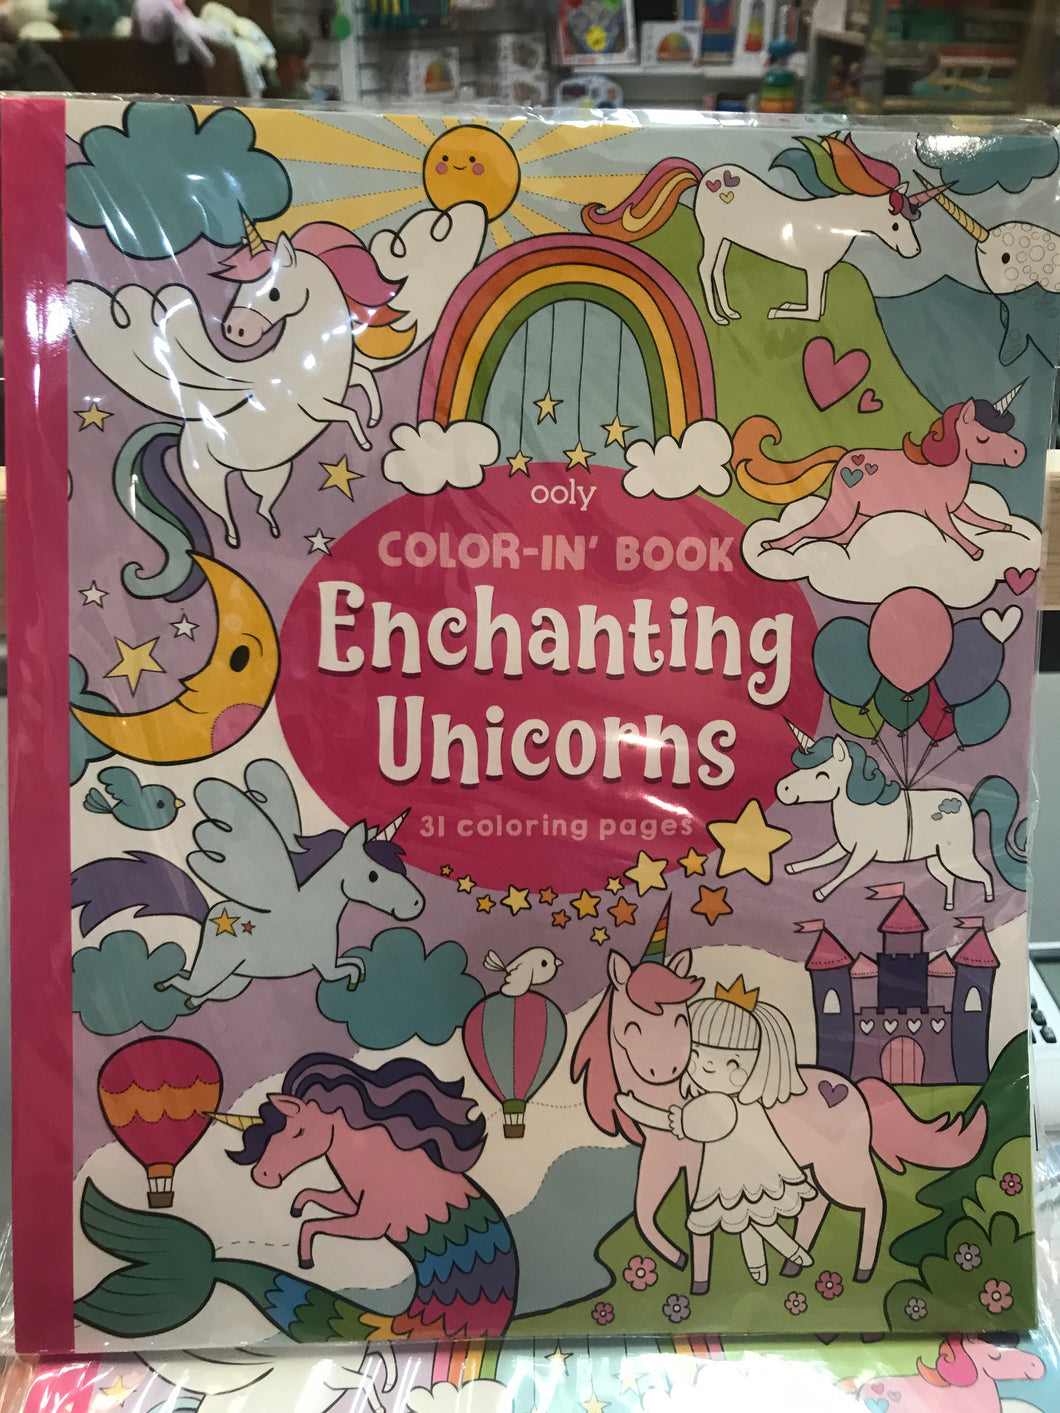 ooly - Enchanting Unicorns Color-in’ Book